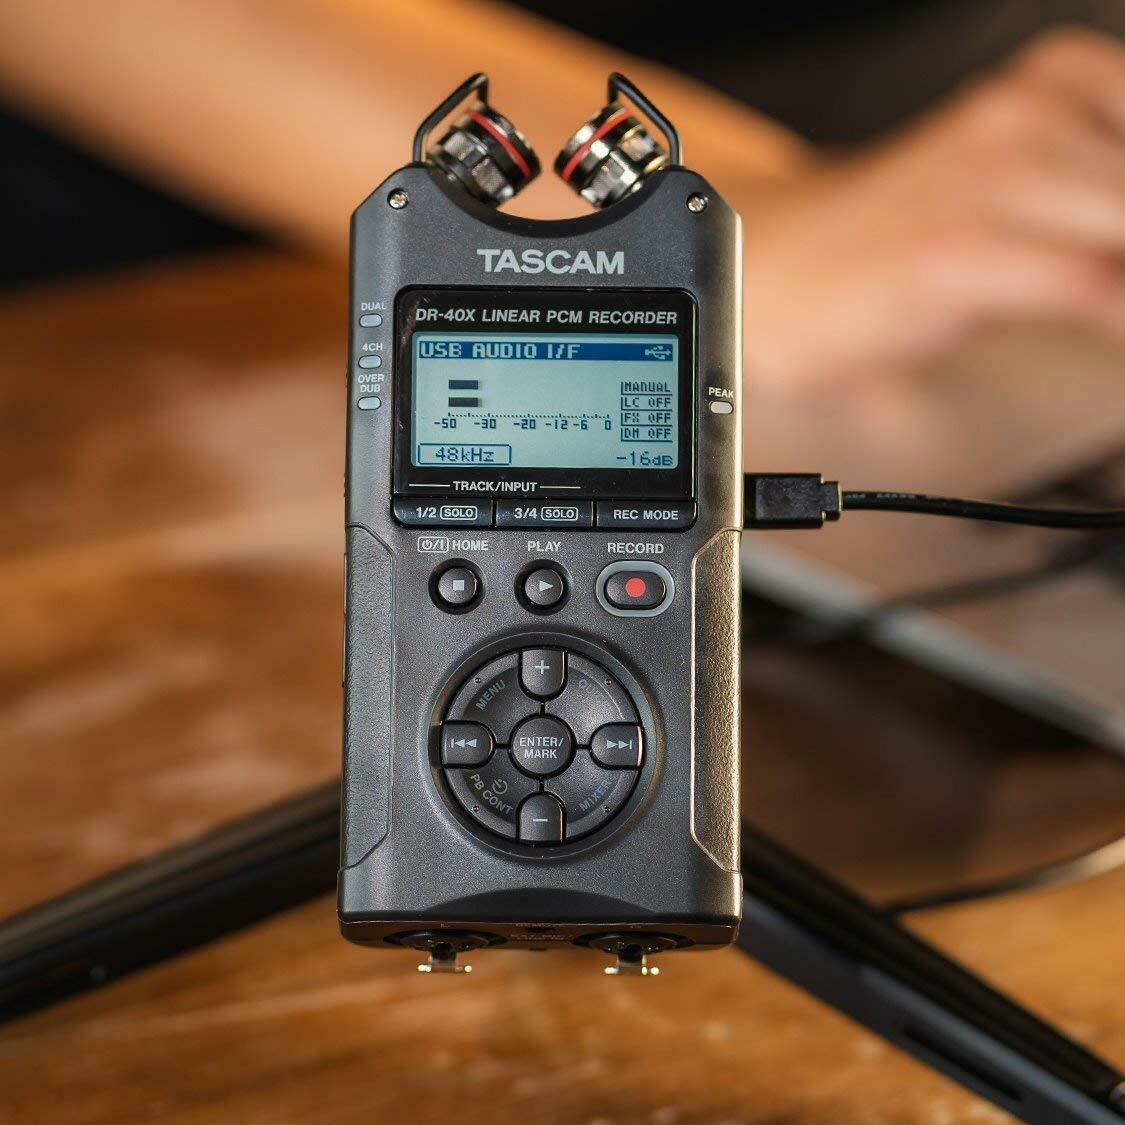 Tascam - DR-40X - Four-Track Audio Recorder with USB Audio Interface - $249.95